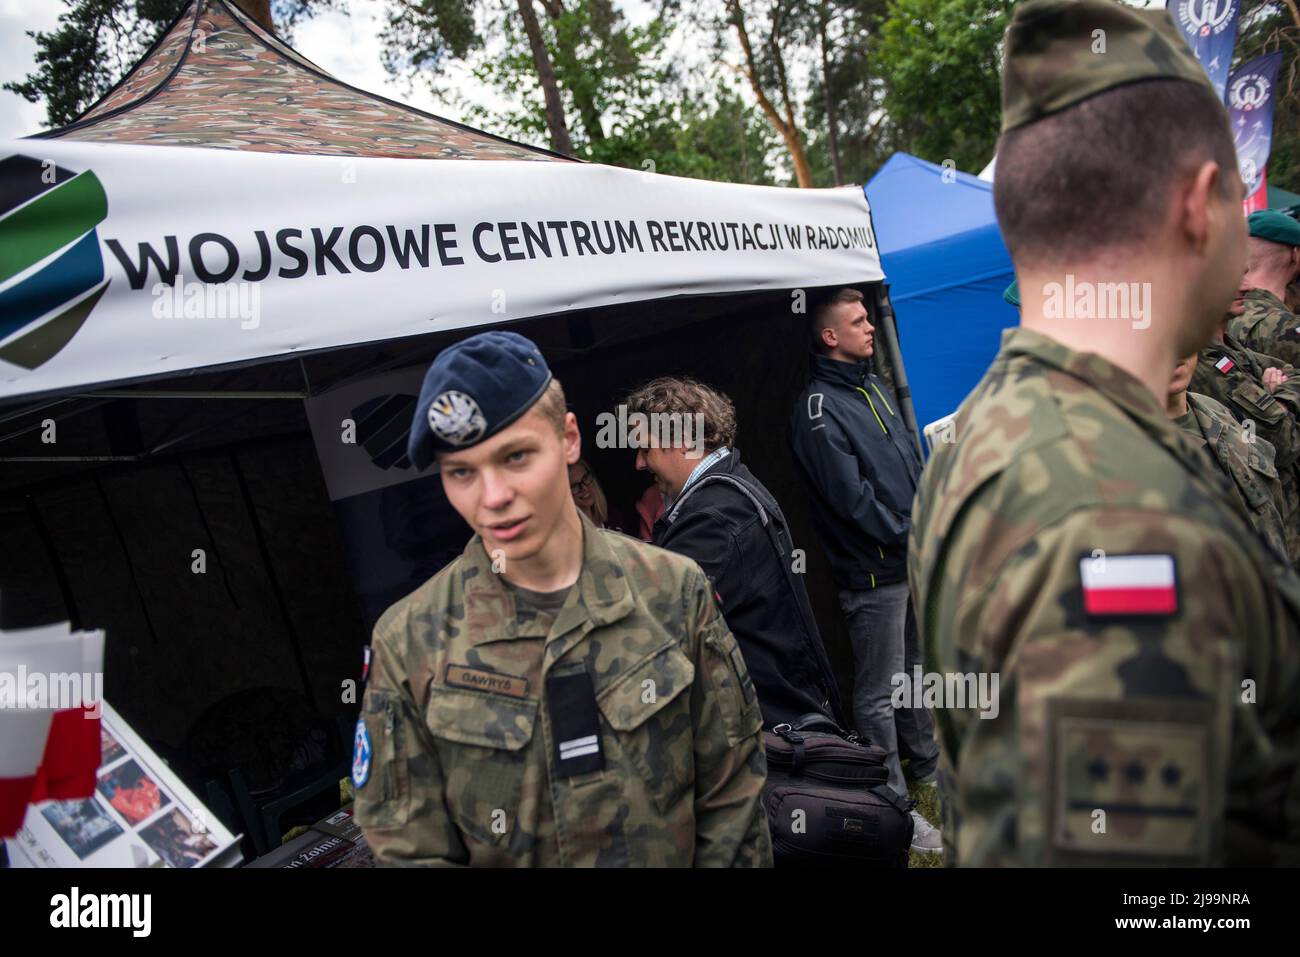 A stand with the military recruitment center is seen at the military picnic. Recruitment for Poland's new voluntary general military service begins from May 21st as the government seeks to double the size of its armed forces. The Defense ministry has revealed details on the conditions for the year-long service, including pay rates and benefits.The introduction of voluntary basic military service was provided for by the Homeland Defense Act, which was initially proposed by the government in October but signed into law shortly after the Russian invasion of Ukraine. (Photo by Attila Husejnow/SO Stock Photo